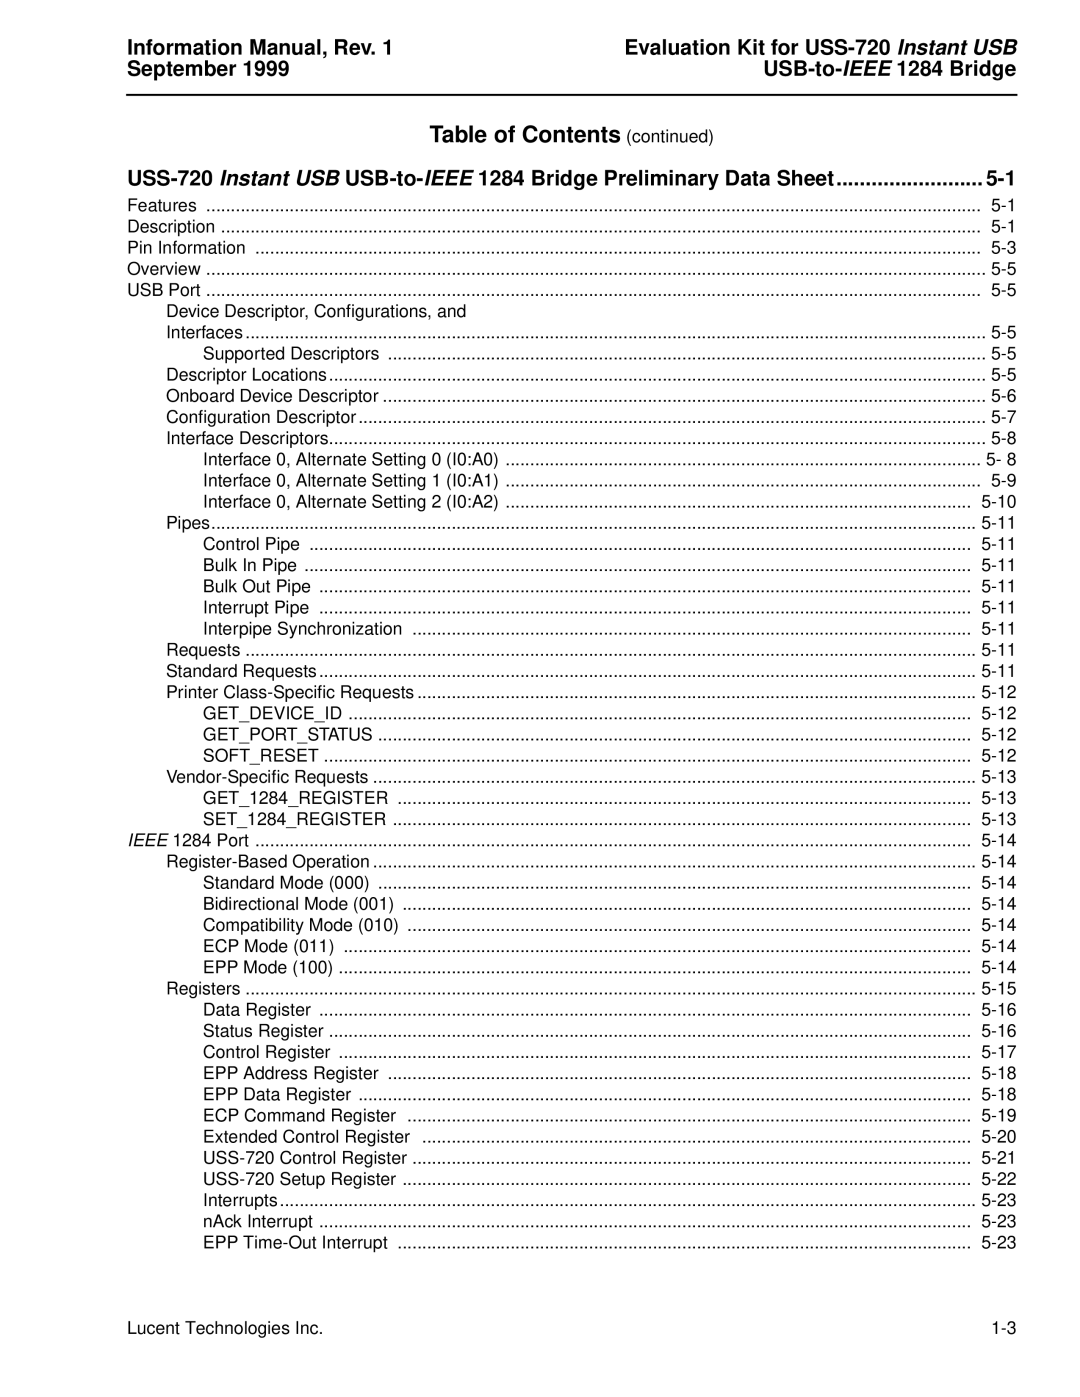 Lucent Technologies manual Table of Contents continued, Evaluation Kit for USS-720, Instant USB, USB-to-IEEE, Bridge 